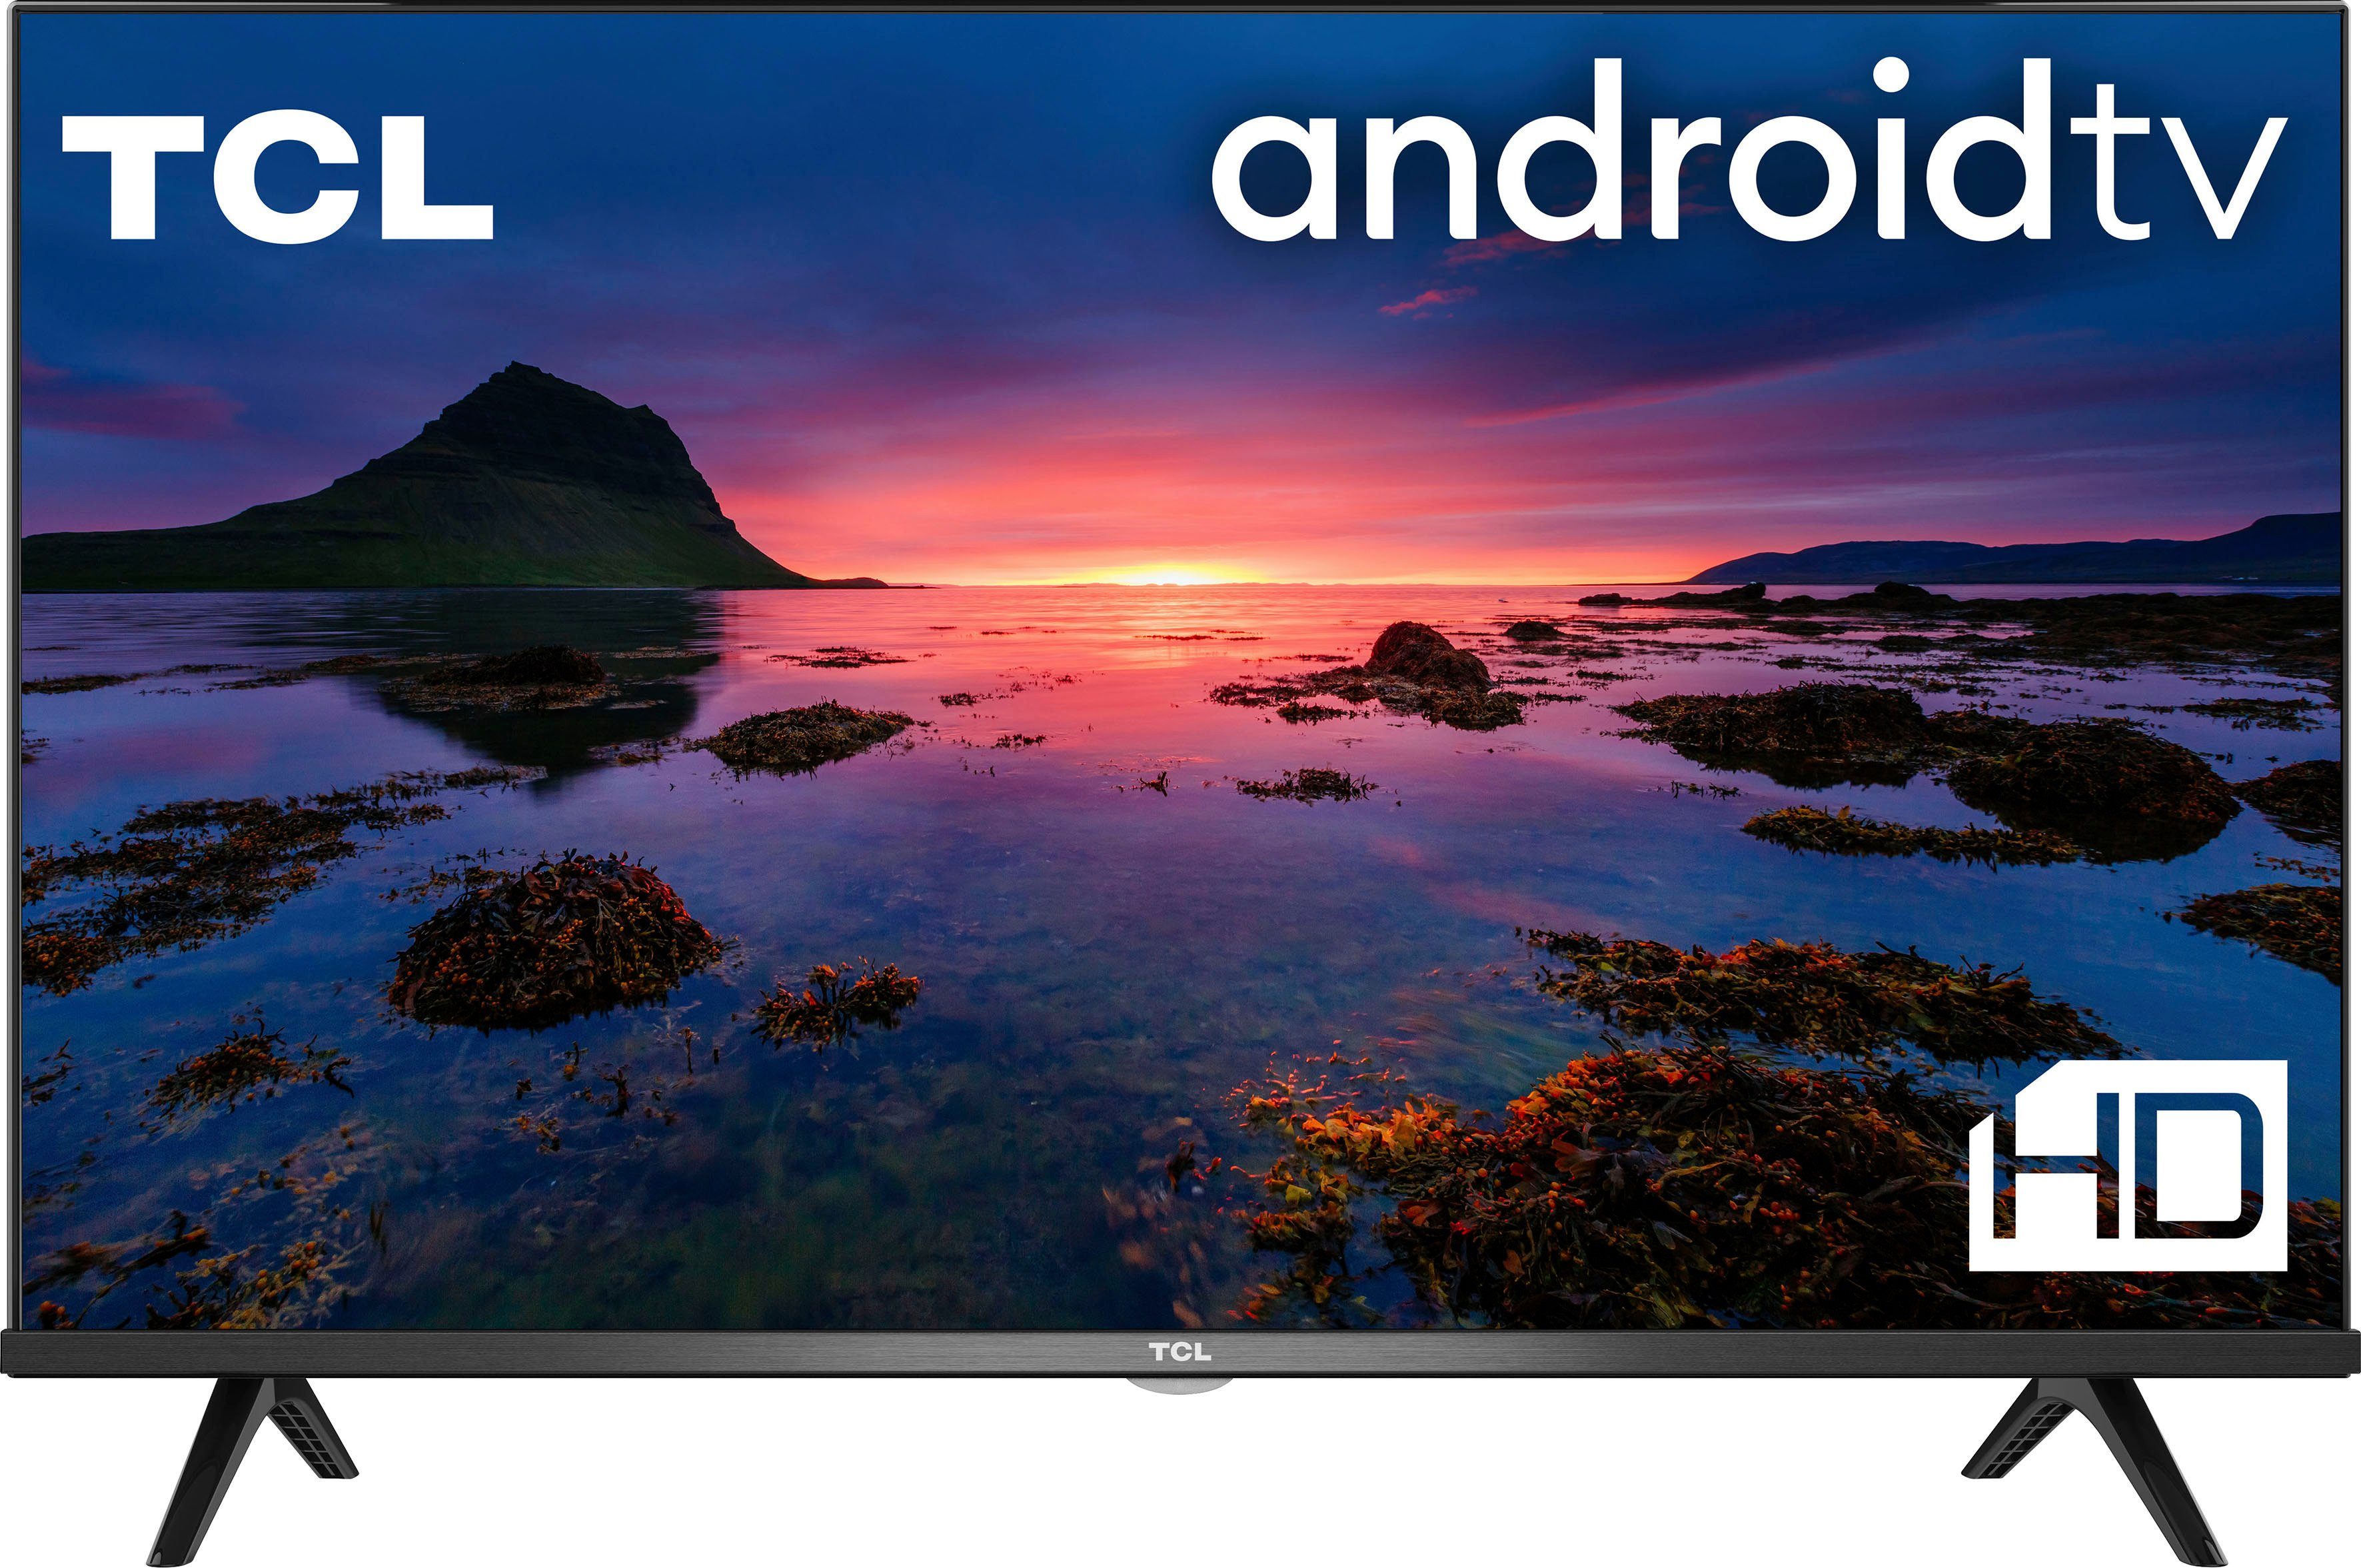 32S6203X1 Android HD ) cm/32 Zoll, TV, LED-Fernseher (81,3 ready, Smart-TV TCL